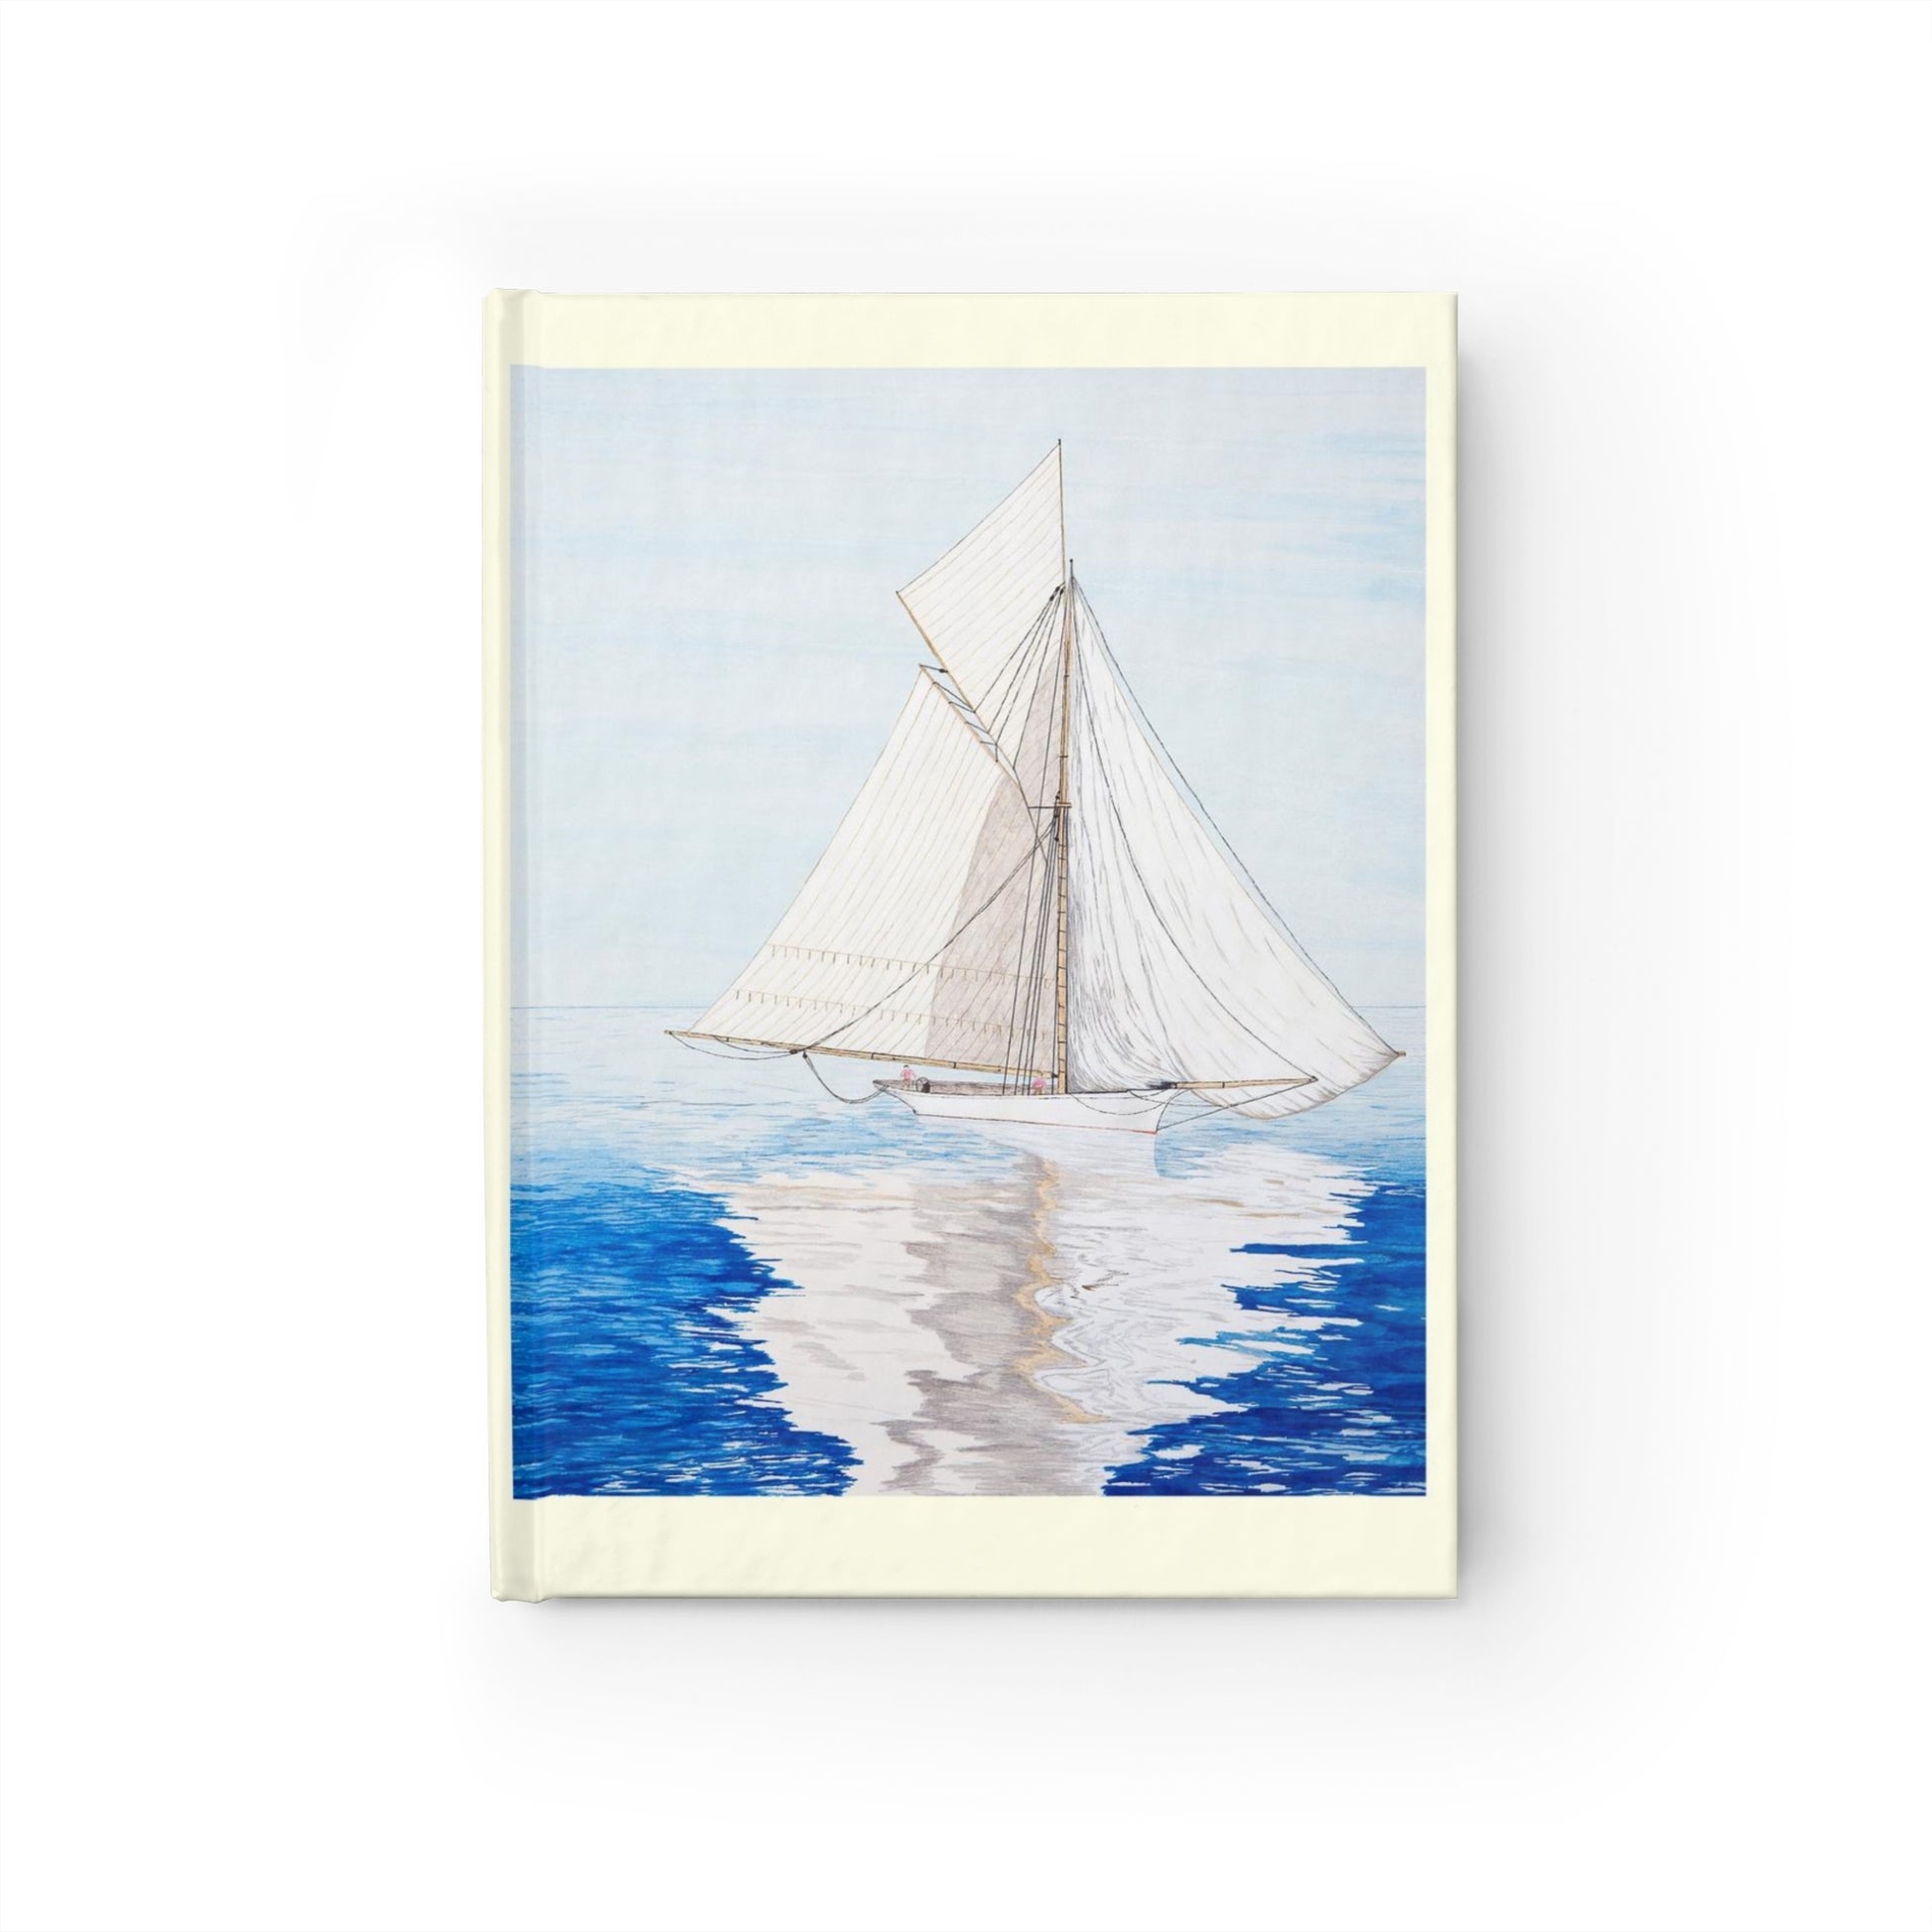 The Becalmed Lined Page Journal makes a perfect gift for a sailing friend.